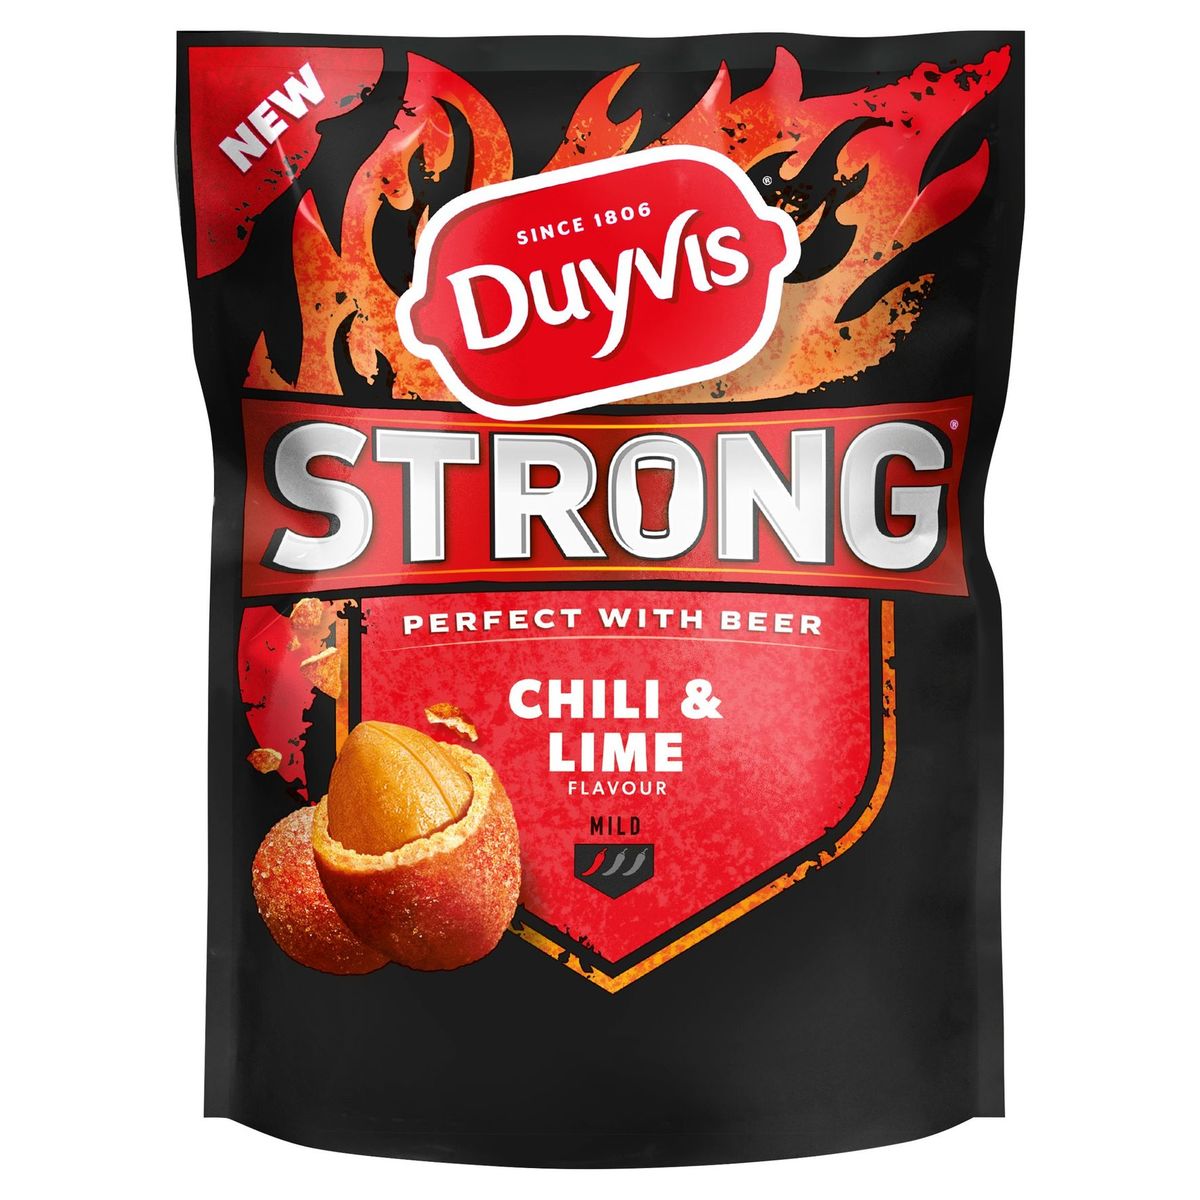 Duyvis Strong Chili & Lime Nootjes 175 gr